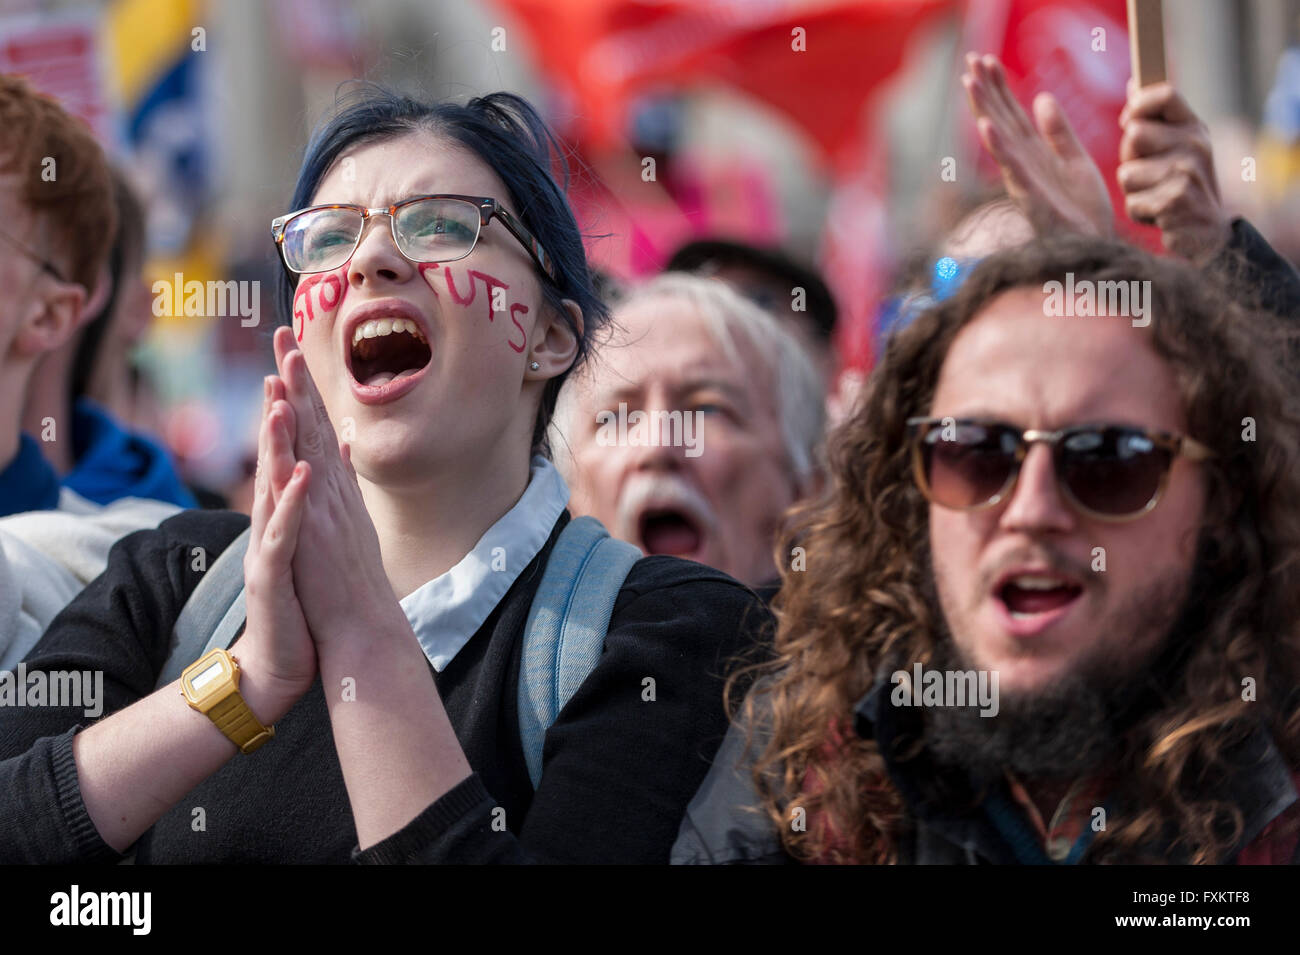 London, UK.  16 April 2016. A girl wears the text Stop Cuts on her arms and face.  Protestors march on Trafalgar Square during The March for Health, Homes, Jobs and Education, organised by the People's Assembly.  Thousands listened to speakers and trade unionists who spoke about anti-austerity, saving the NHS and an end to Tory rule.  Credit:  Stephen Chung / Alamy Live News Stock Photo